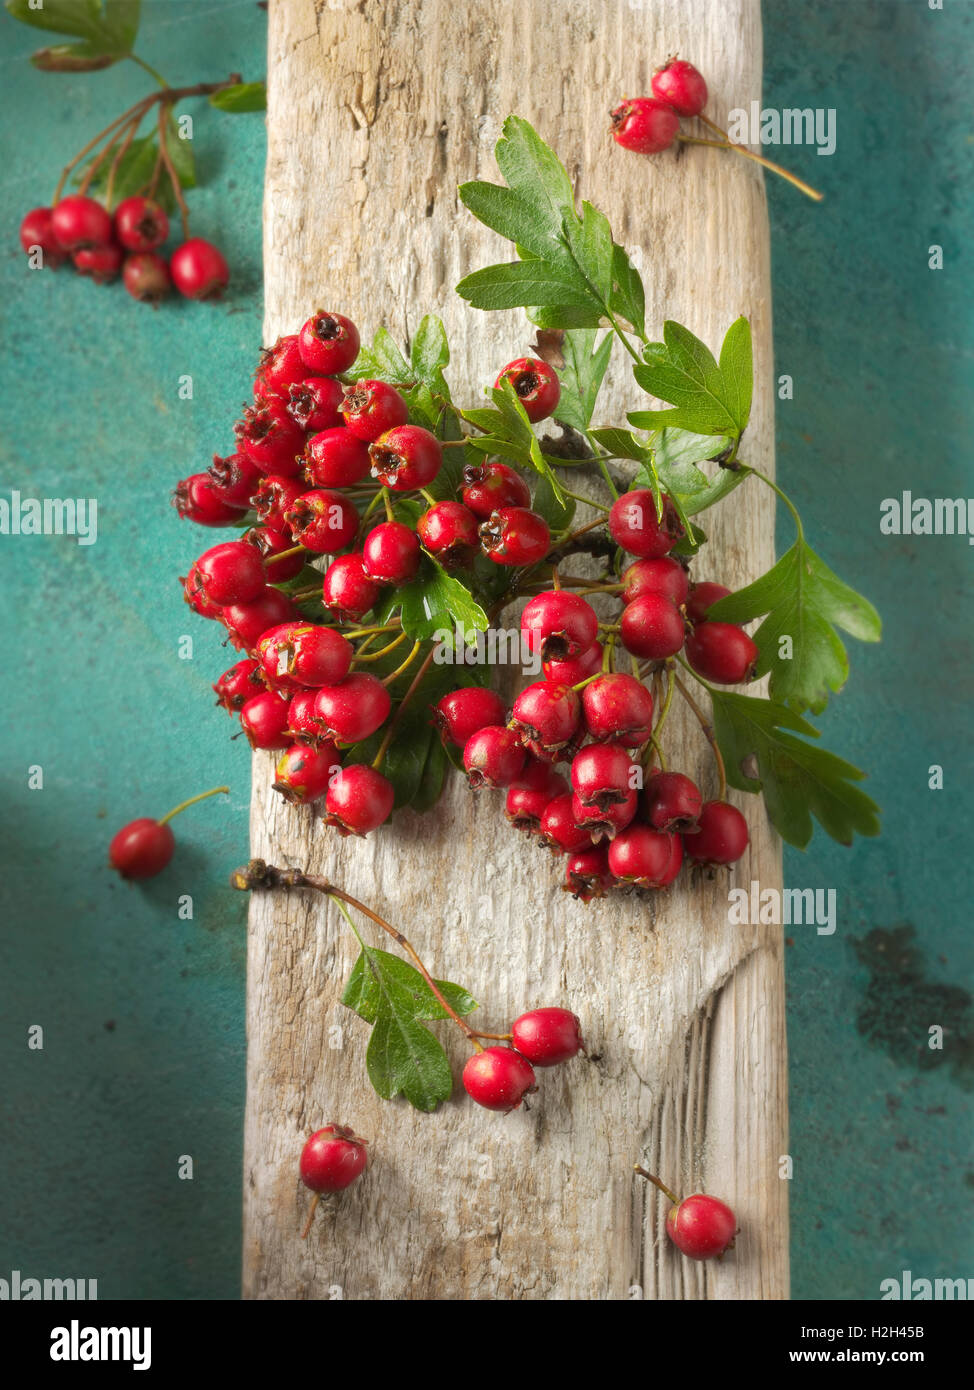 Fresh picked berries from a hawthorn, thornapple, May-tree, whitethorn, or hawberry bush (Crataegus) Stock Photo